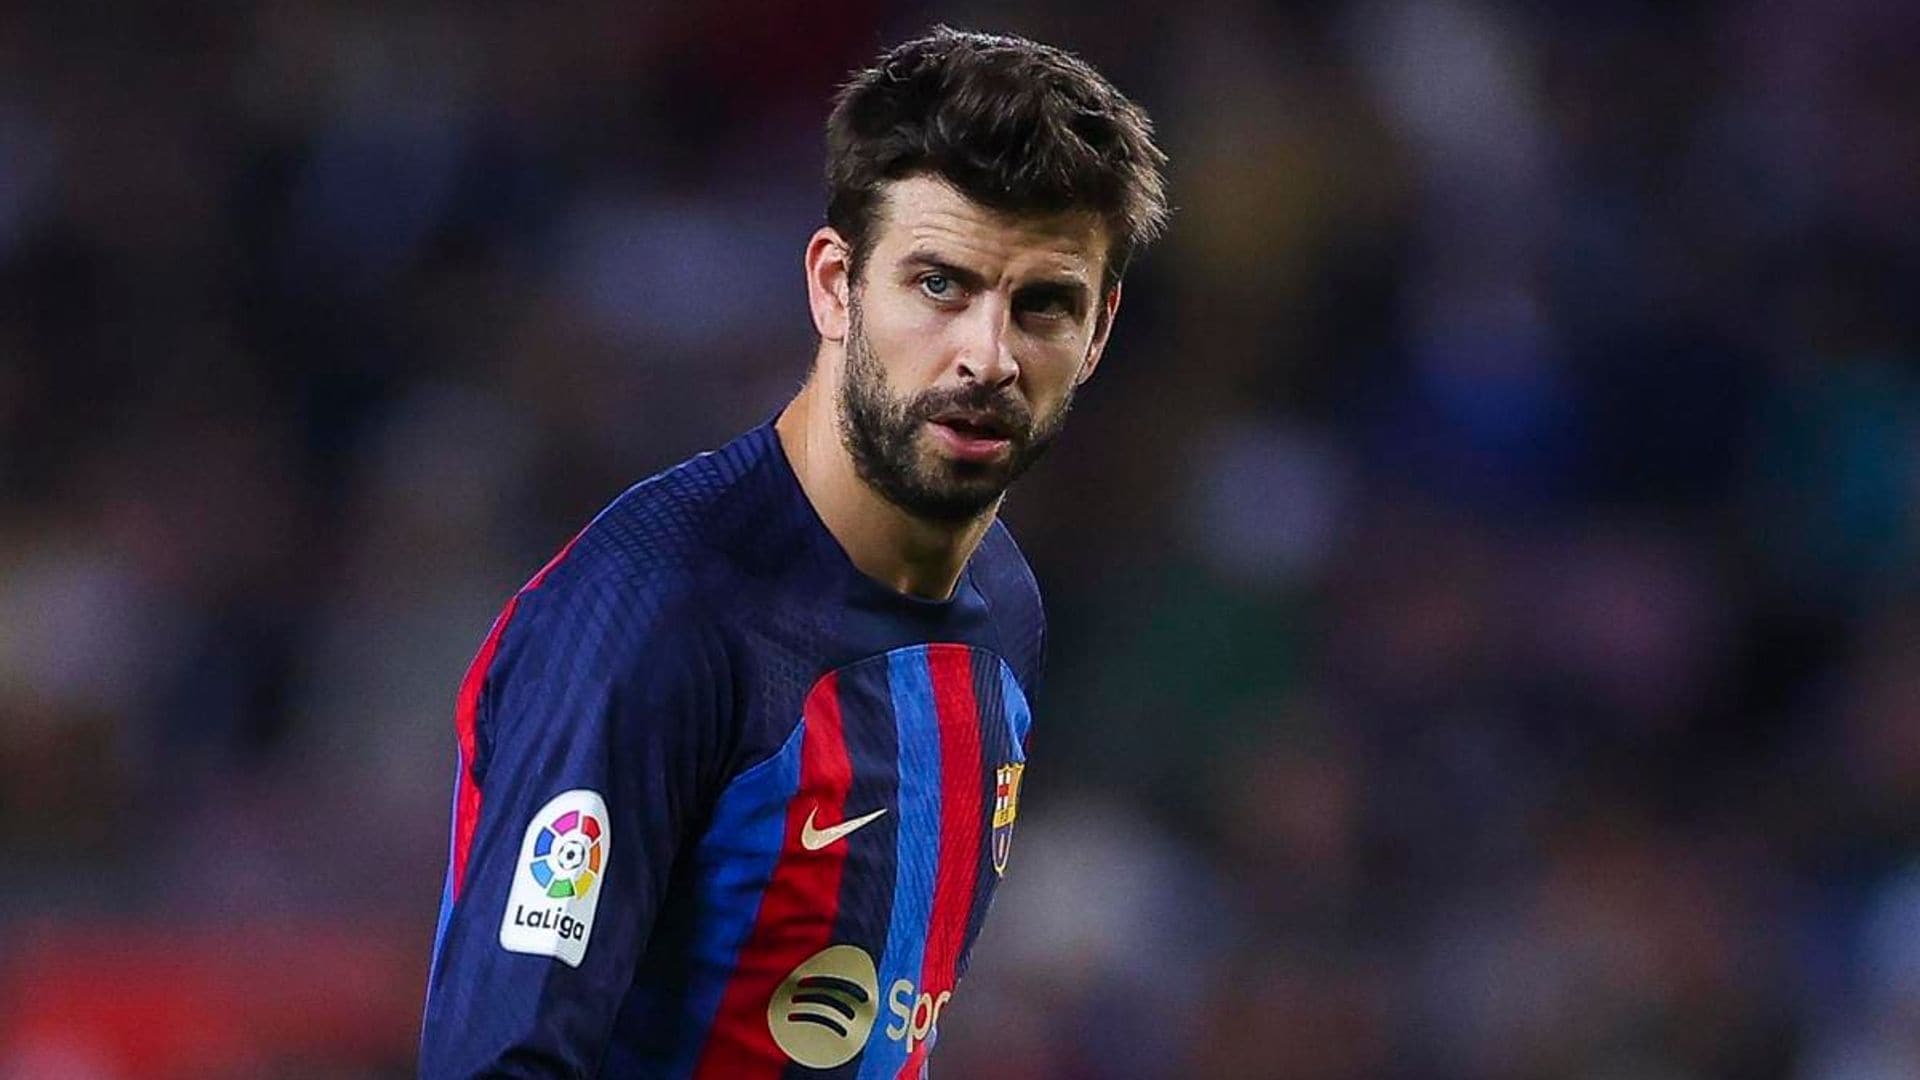 Gerard Piqué announces his retirement from soccer: Find here when he will play his final match